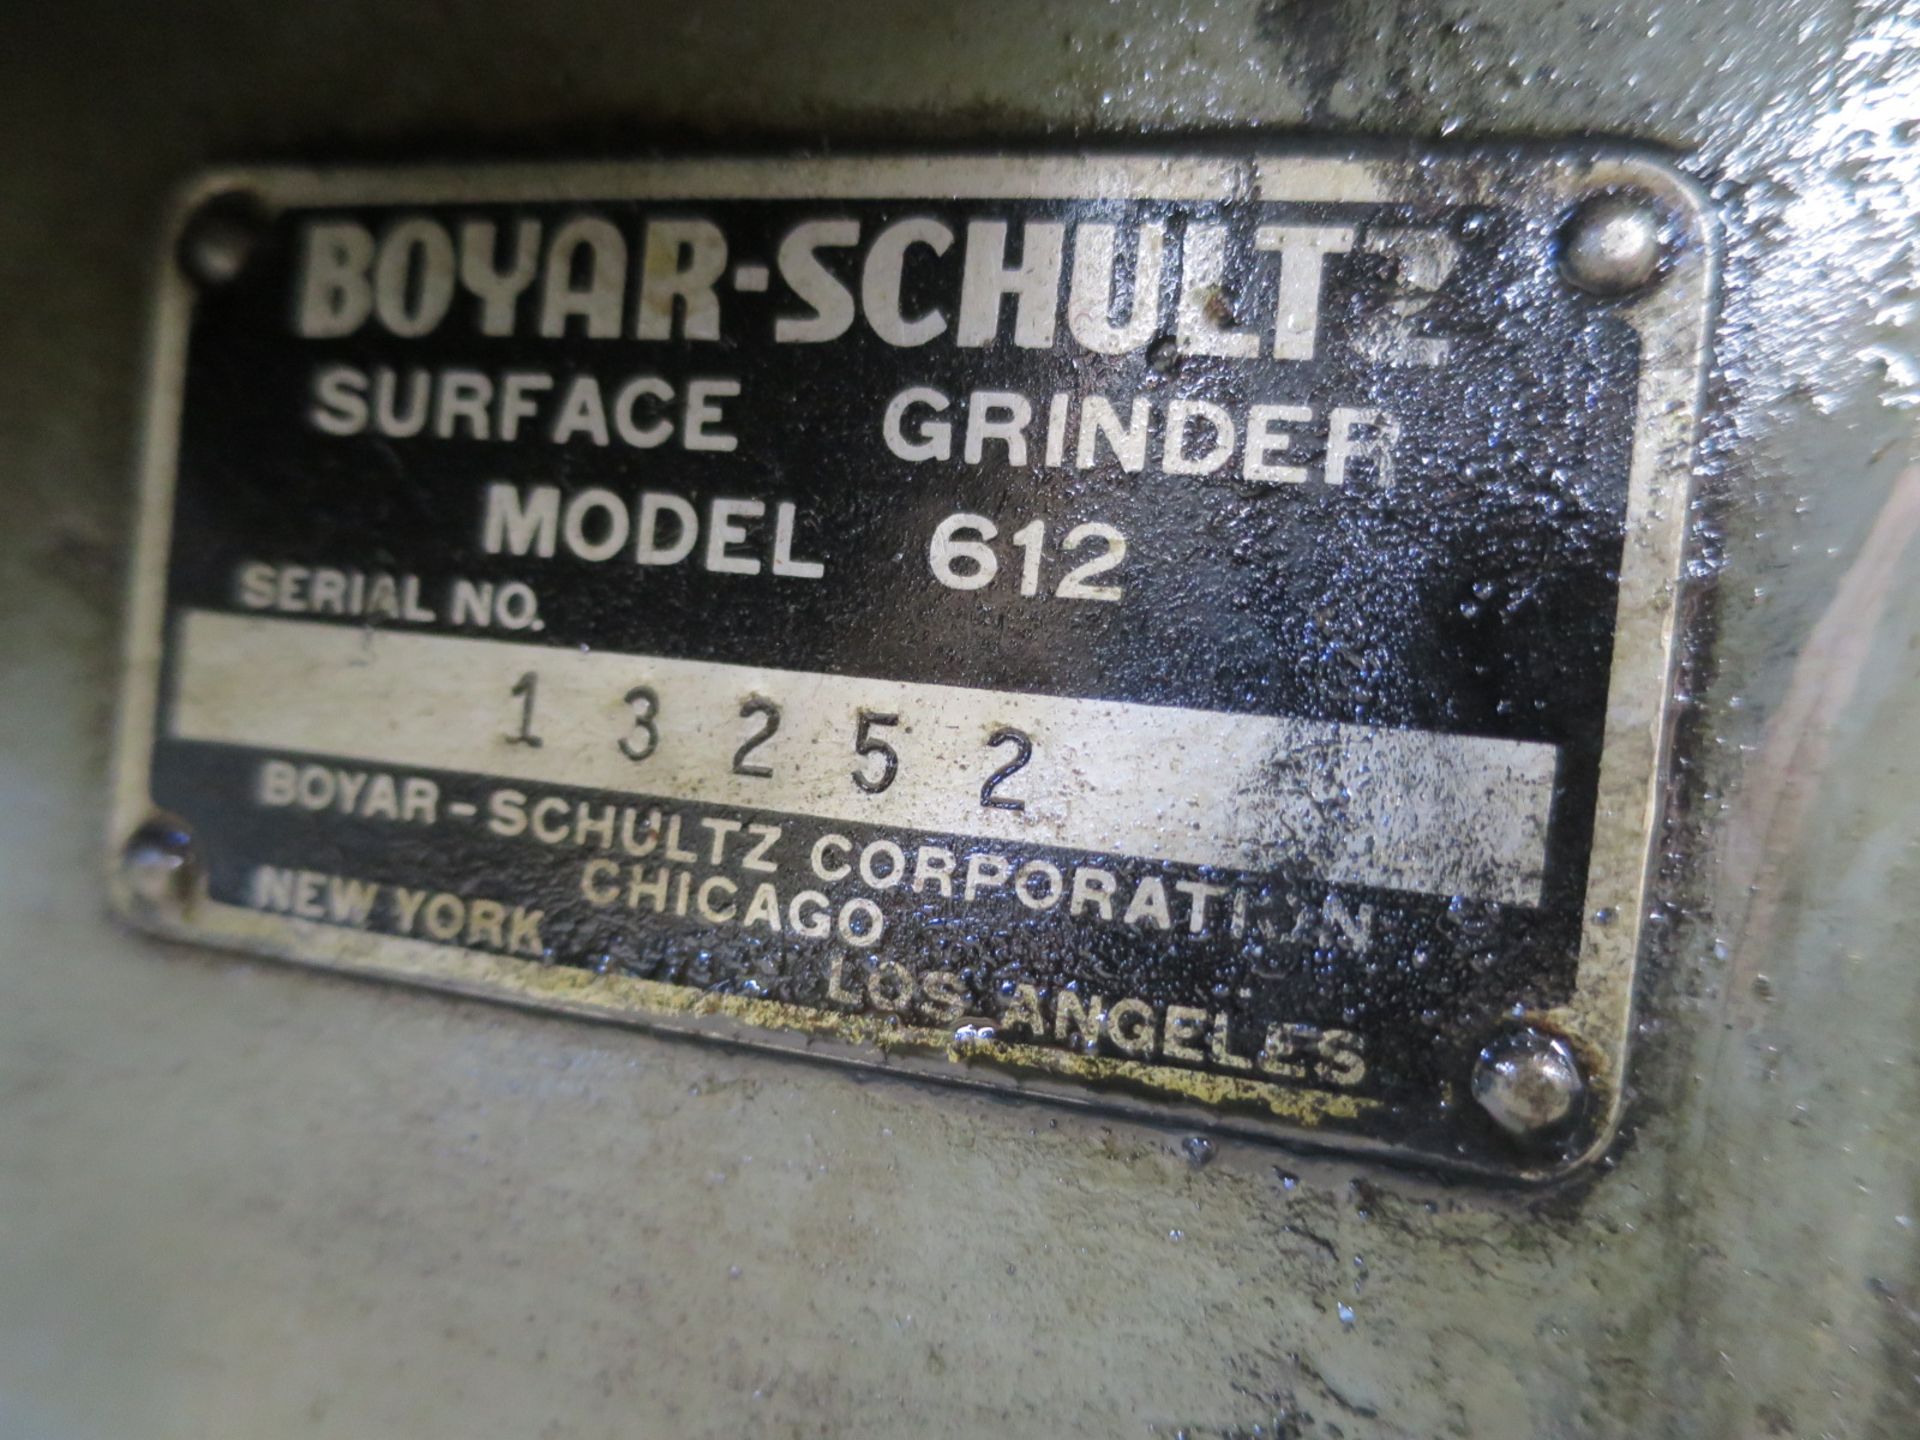 Boyar Schultz 612 Surface Grinder, Sn 13252 With Walker Ceramax Magnetic Chuck Table Size: 6? - Image 3 of 3